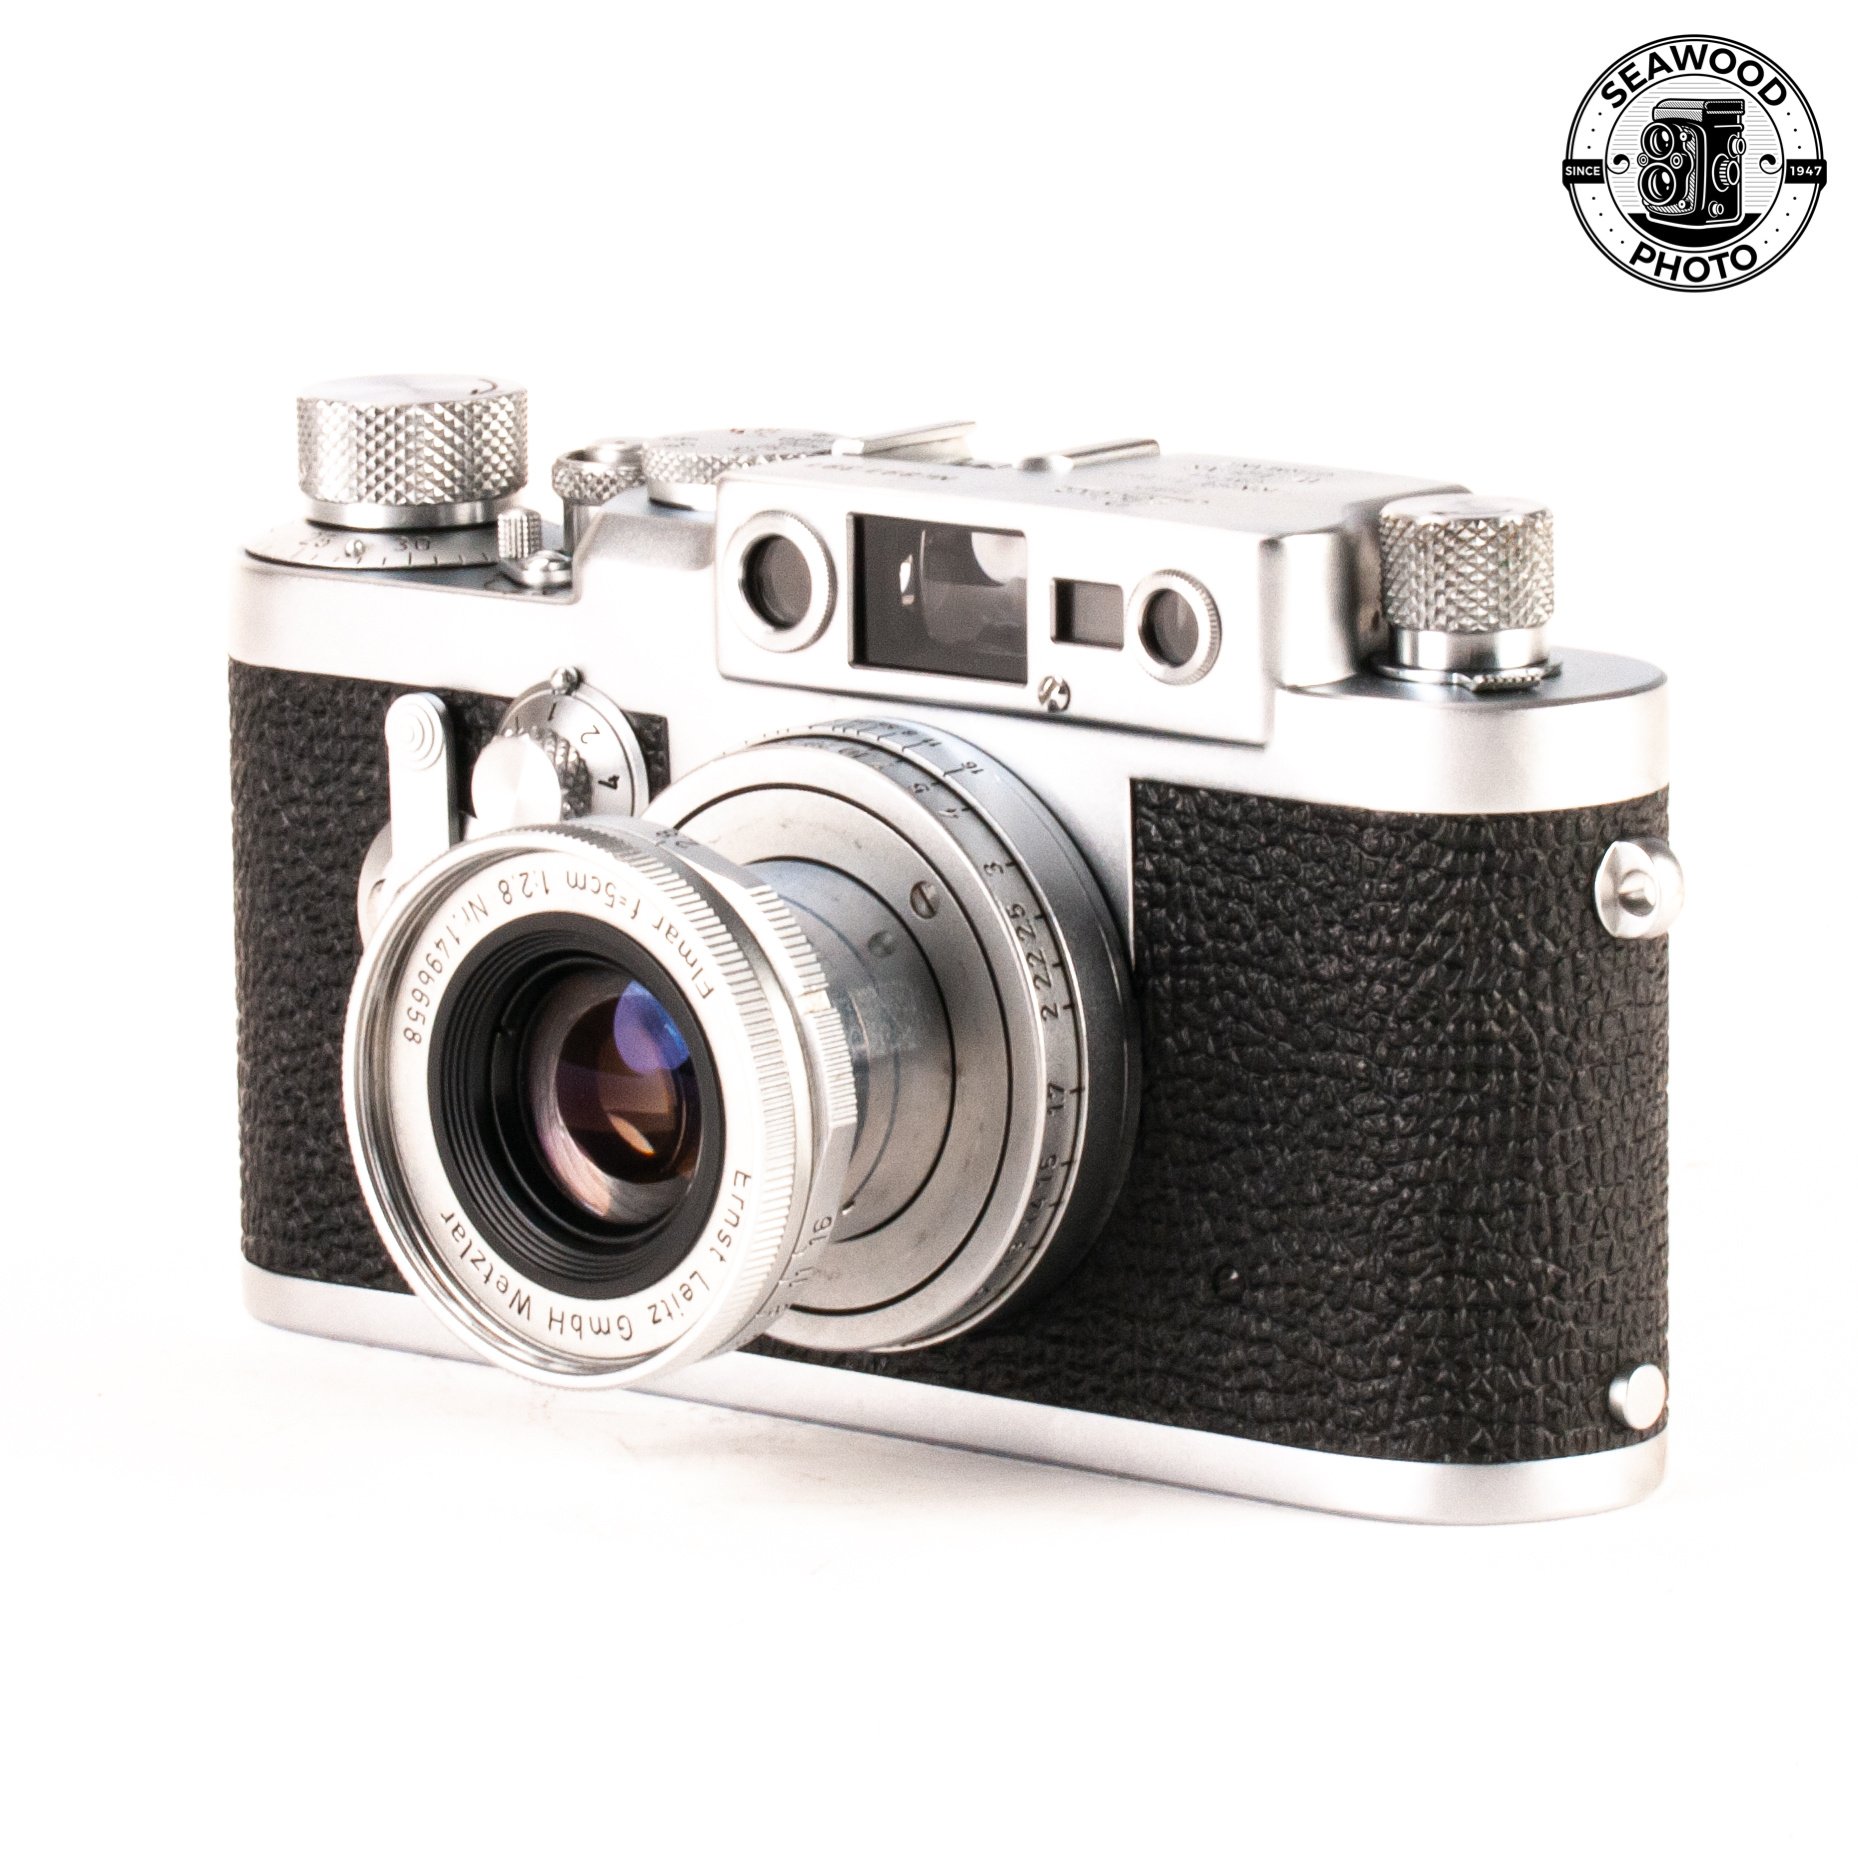 Leica IIIG w/50mm f/2.8 Collapsible Elmar EXCELLENT - Seawood Photo